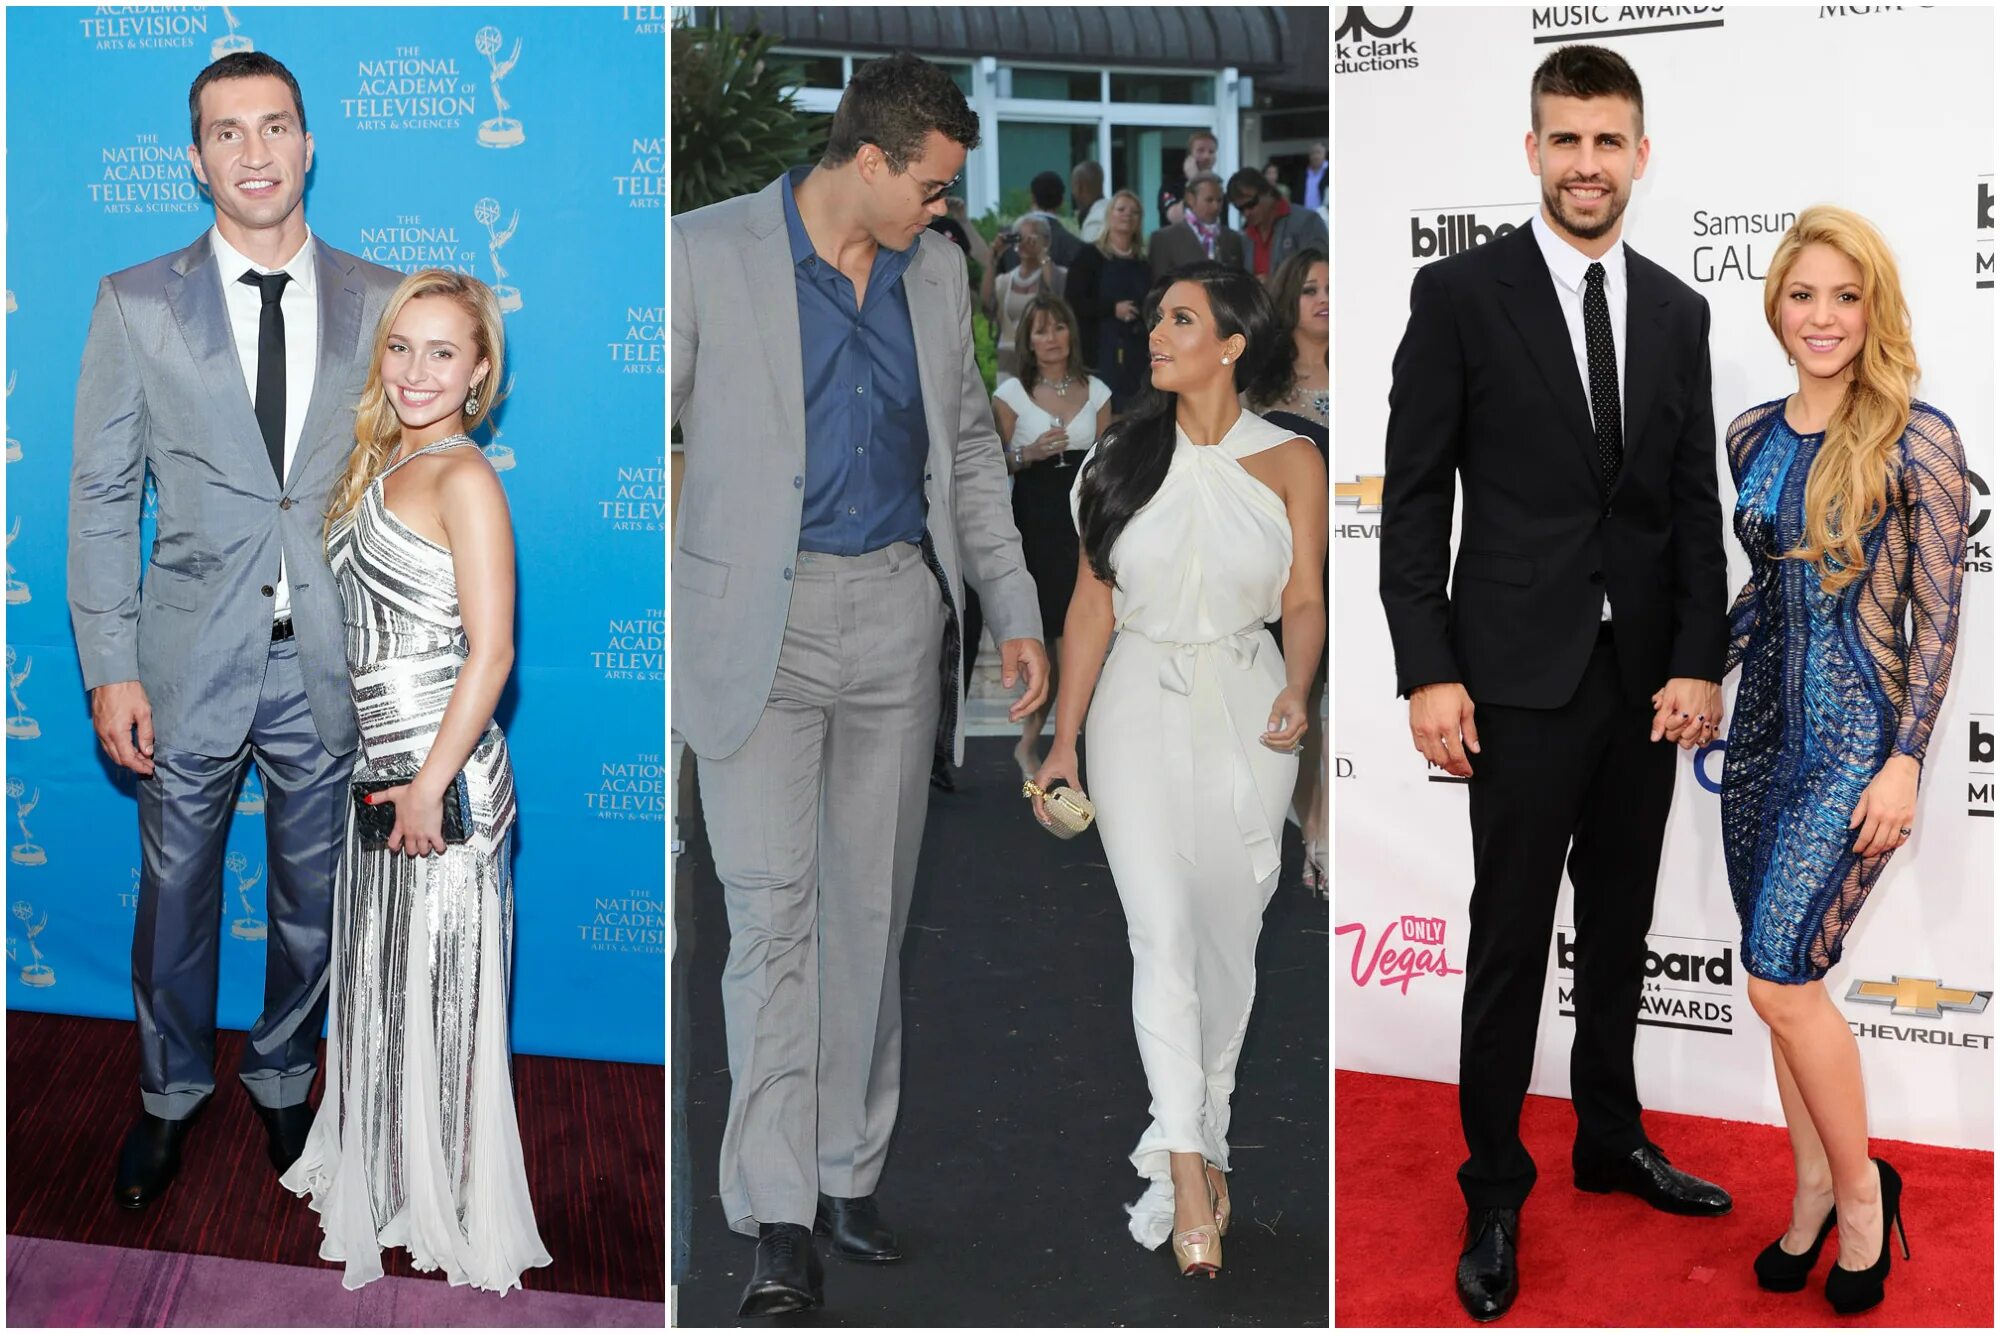 Celebrities Full height. Height Altitude разница. Shakira height. Height difference